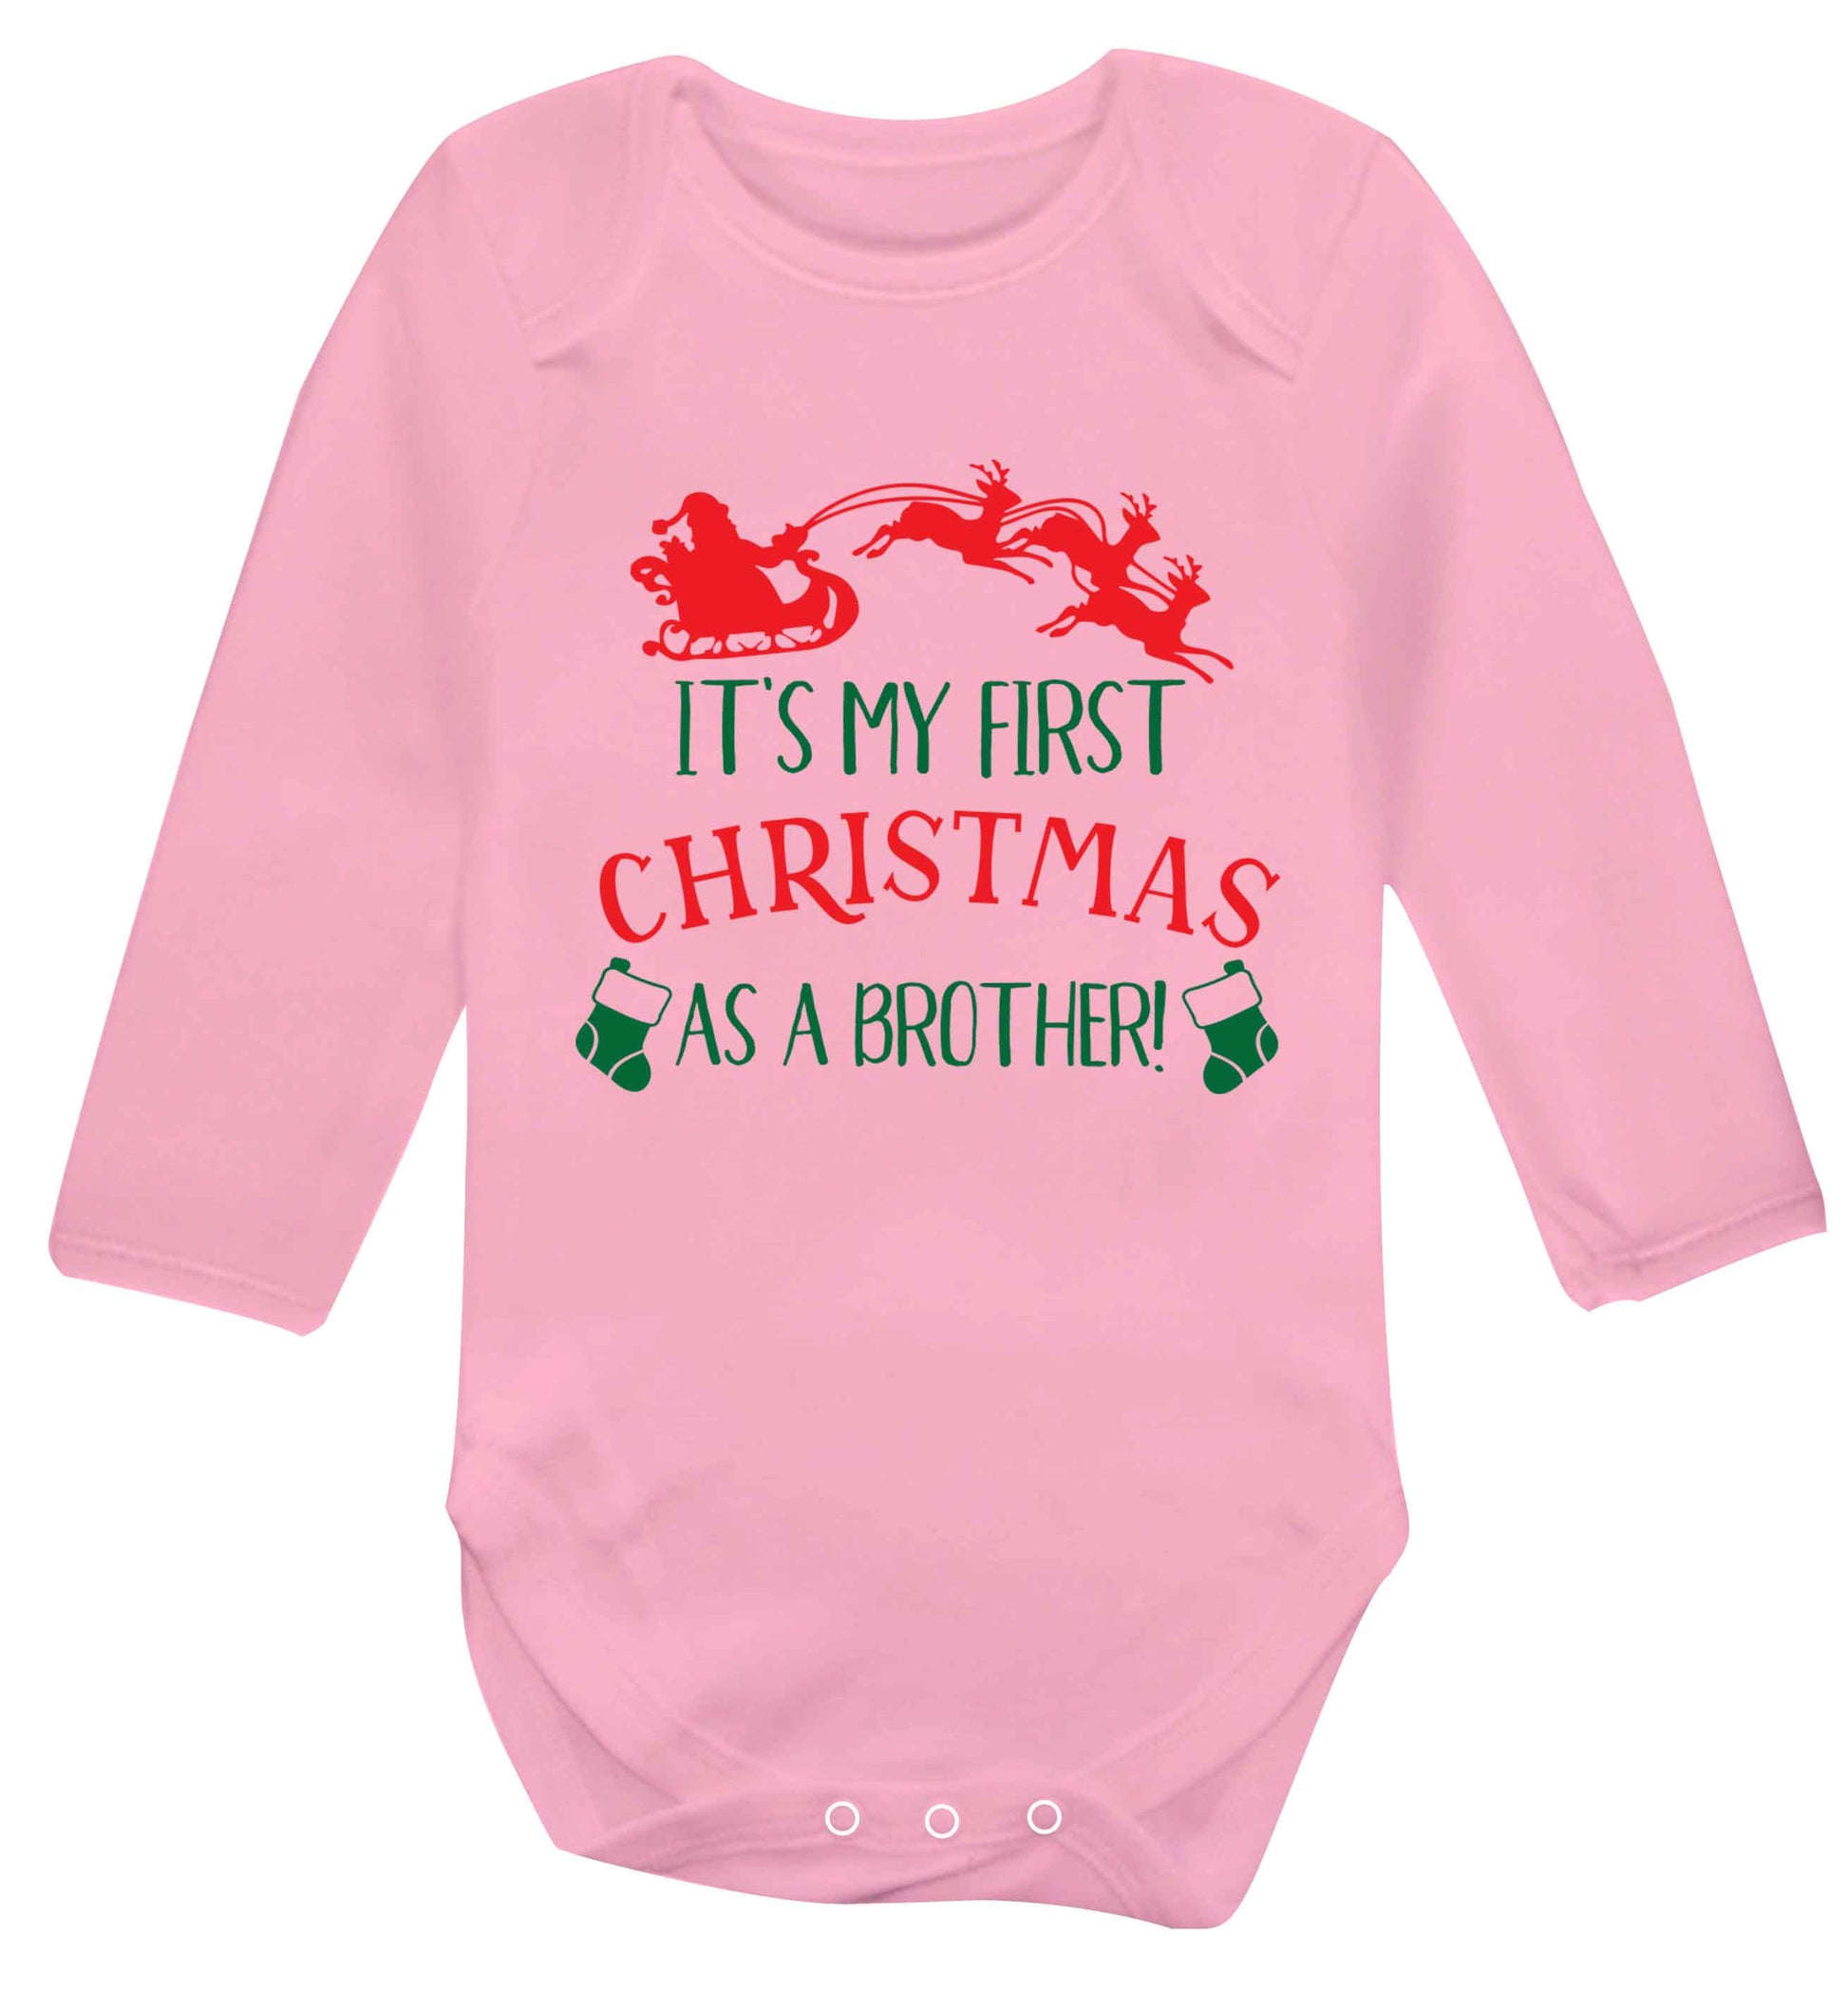 It's my first Christmas as a brother! Baby Vest long sleeved pale pink 6-12 months